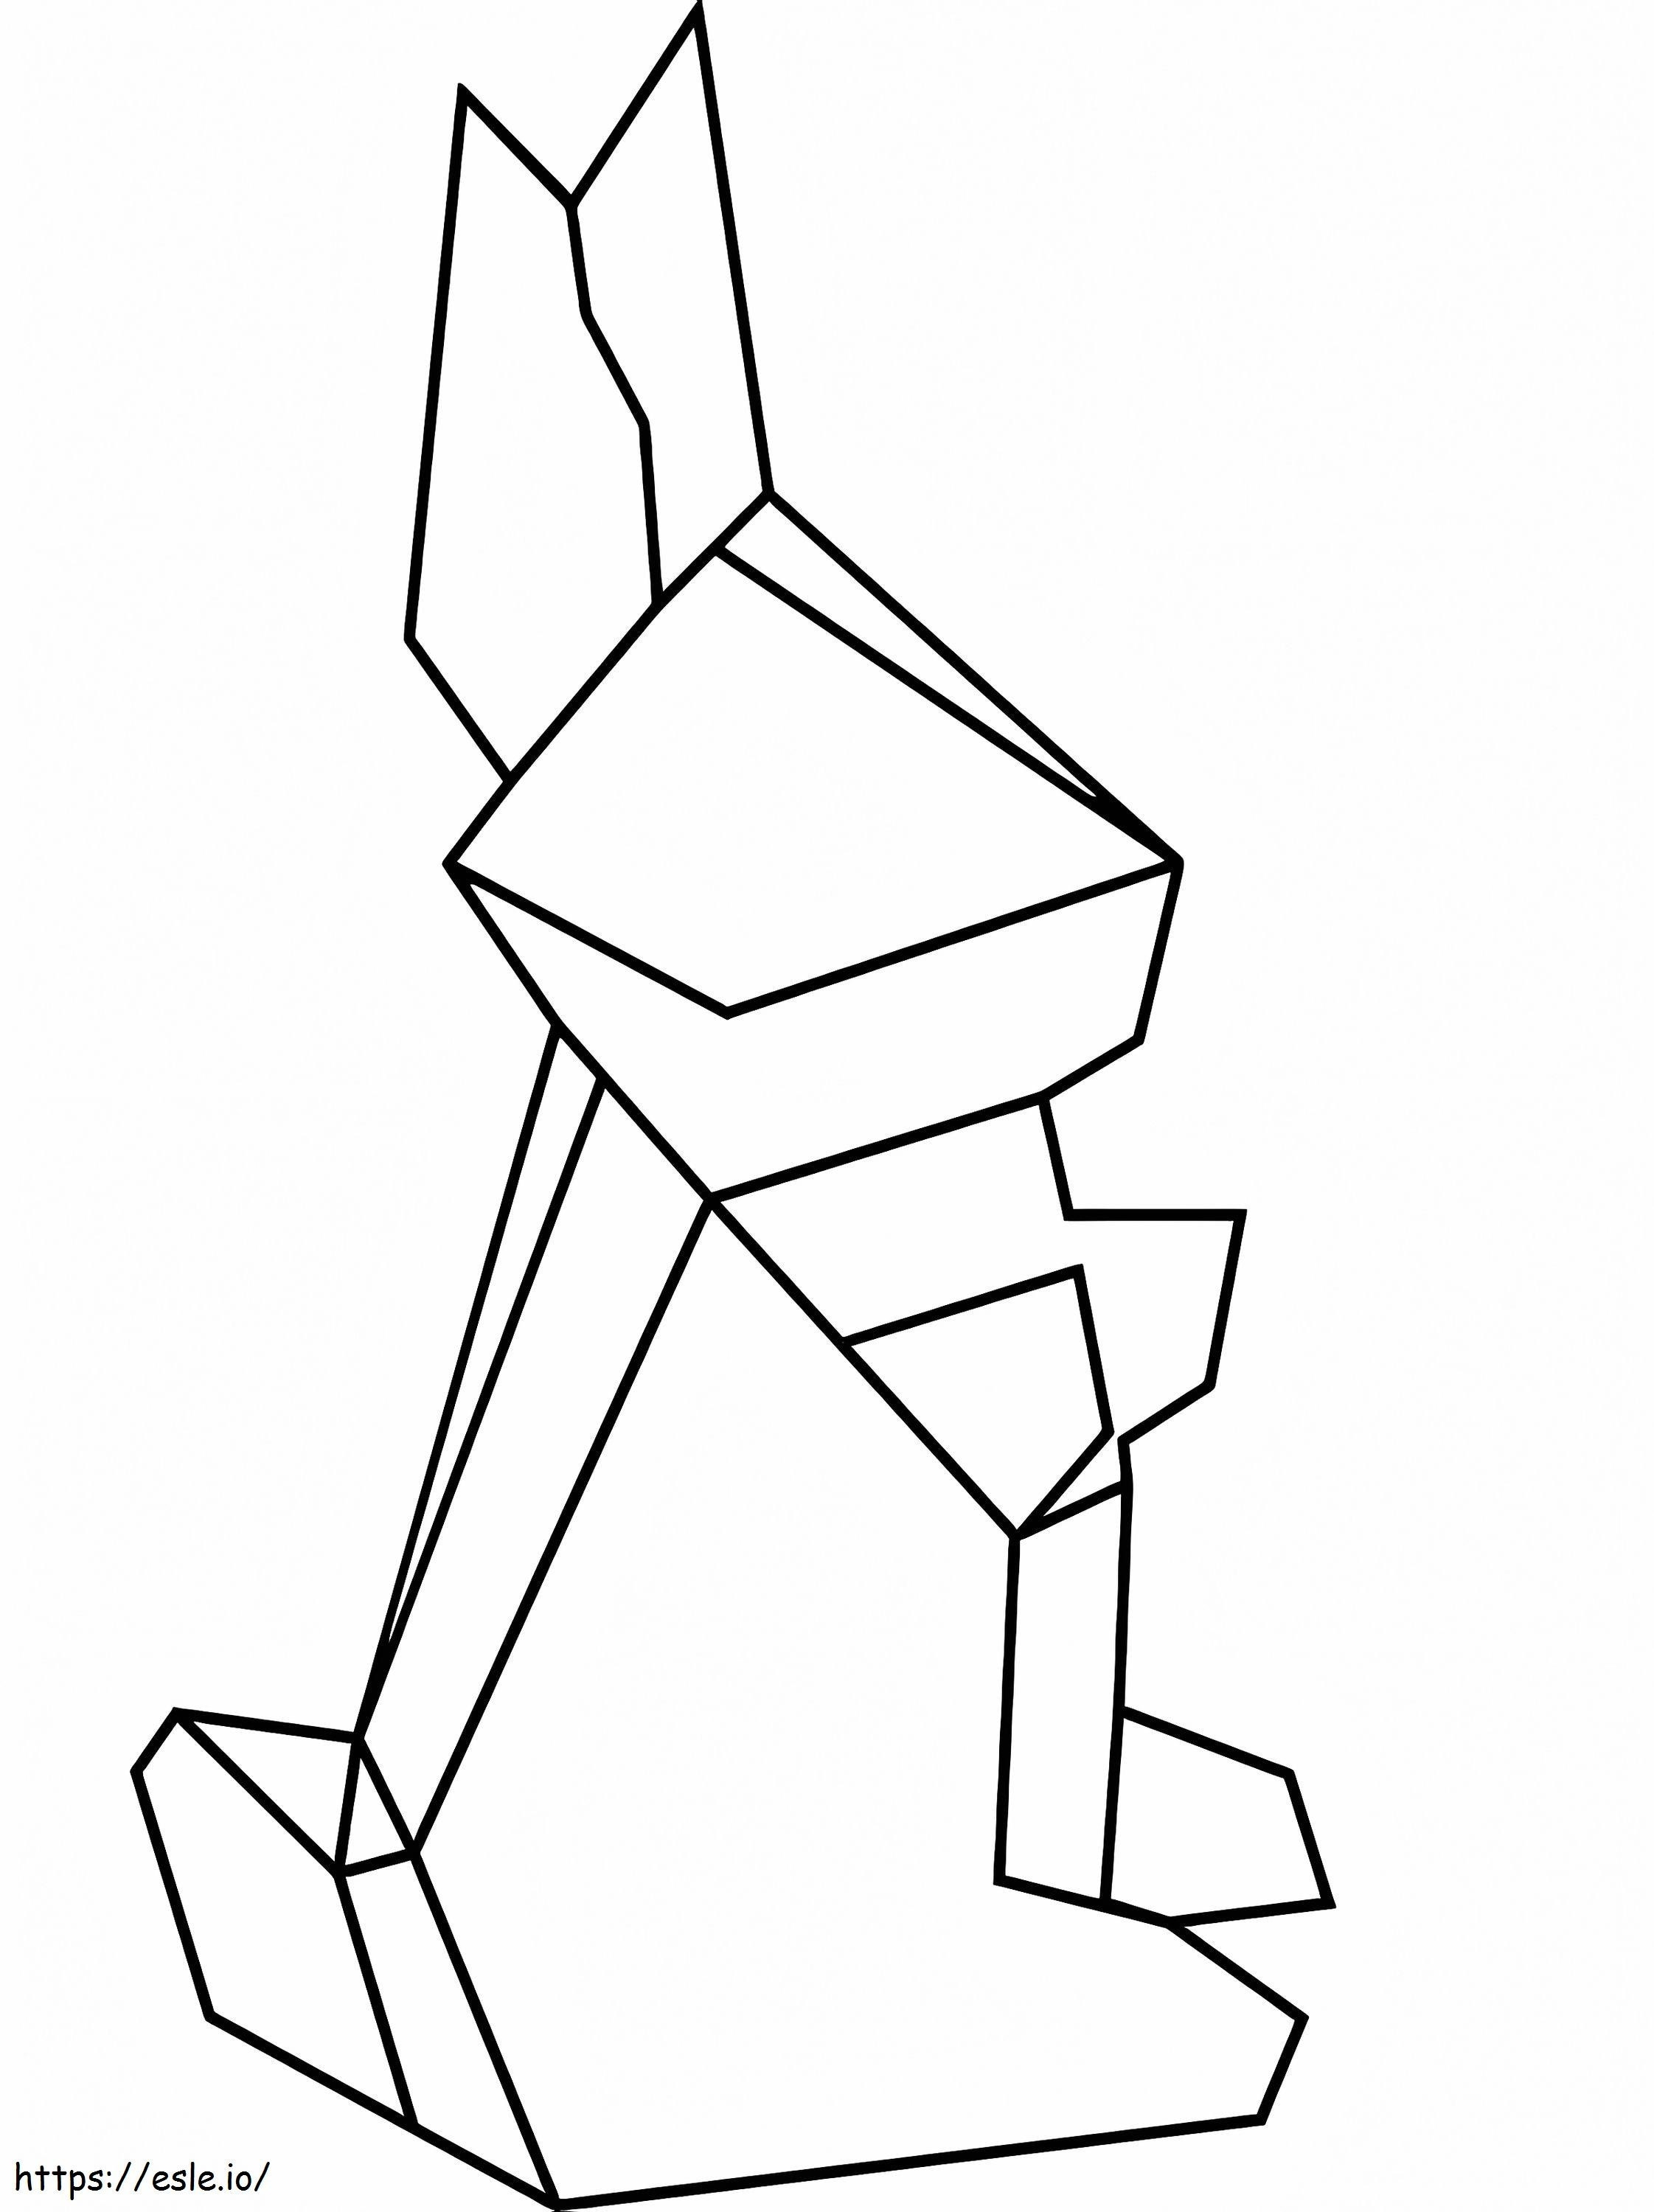 Origami Bunny coloring page